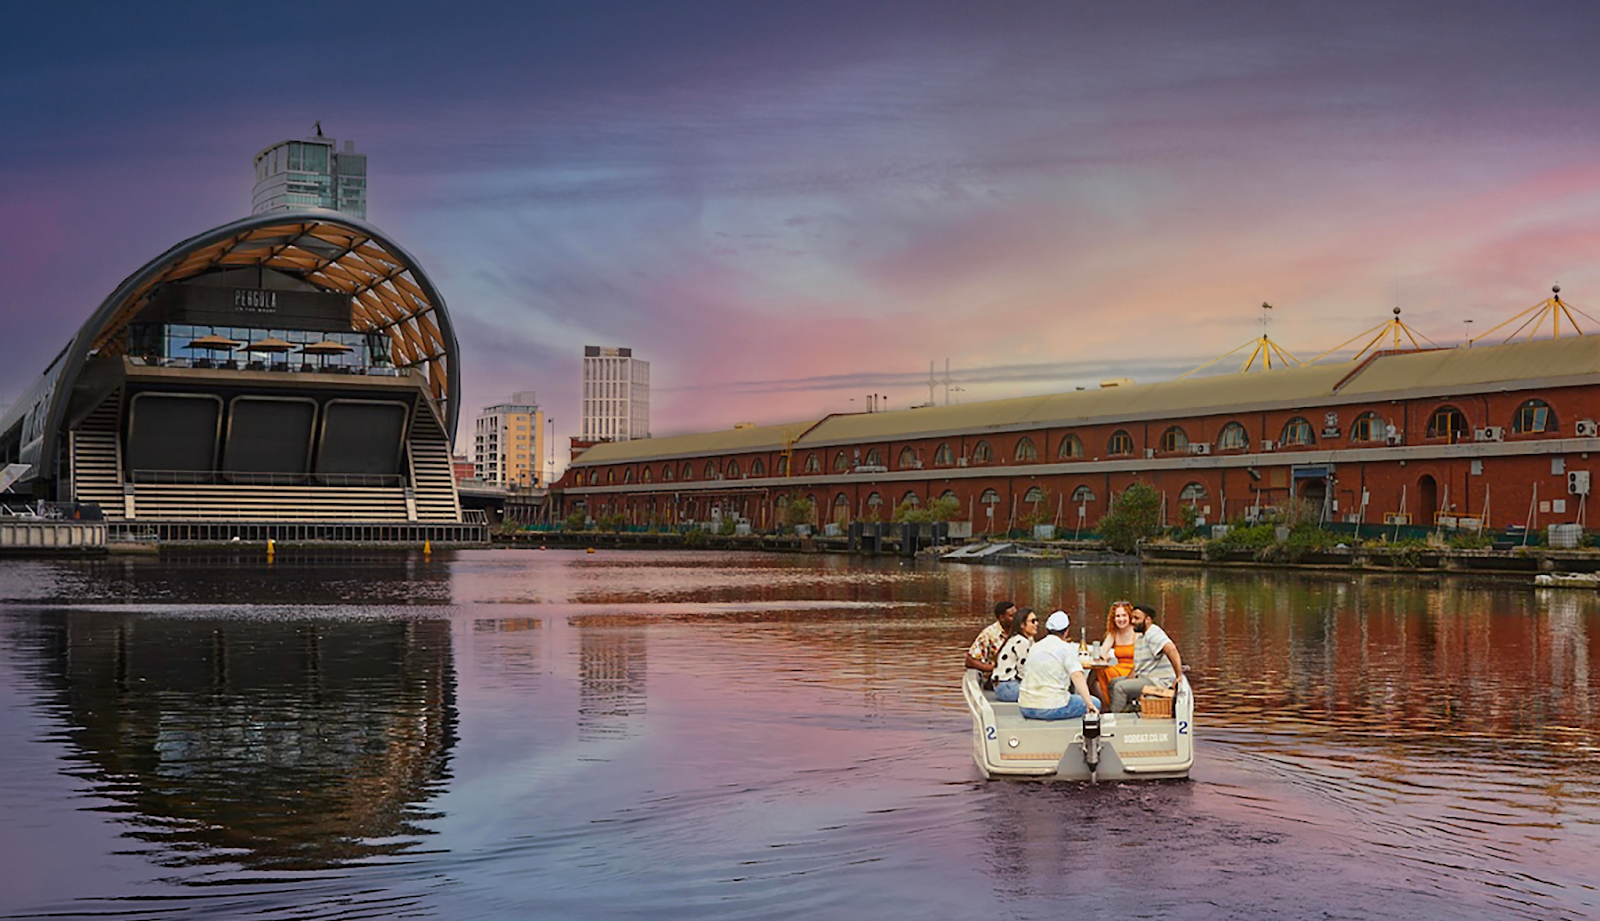 London boat trip launch that's set to make you happier and